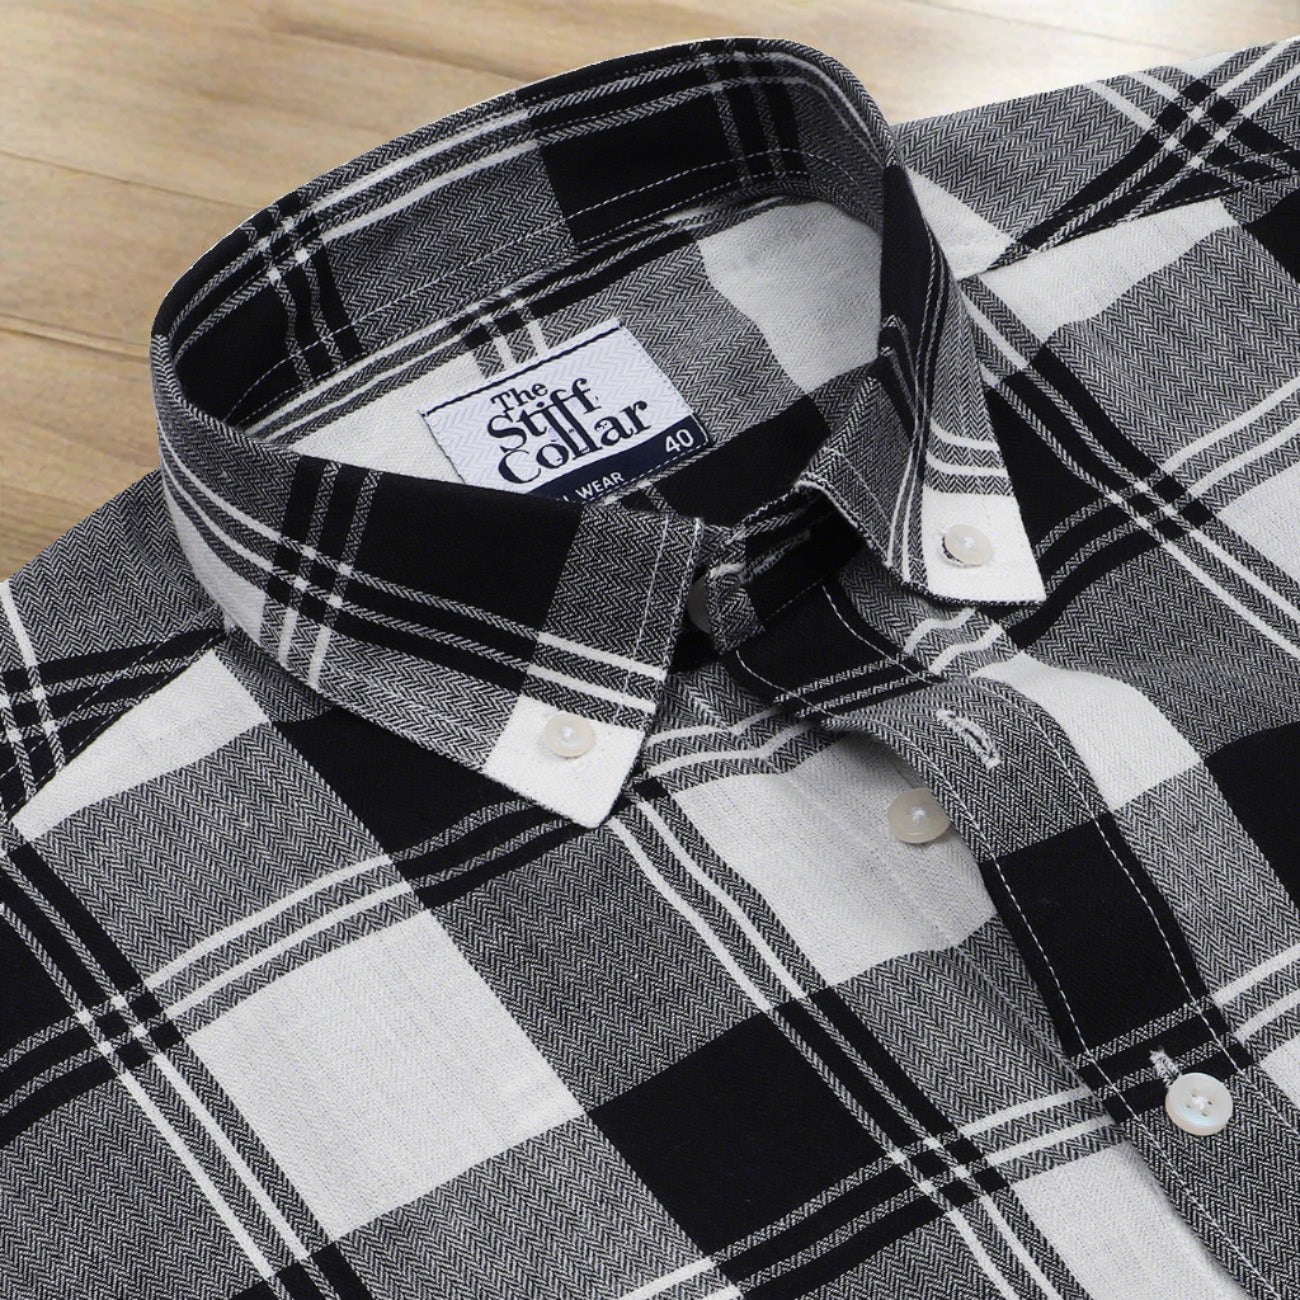 Two button-up shirts side by side, one white and one black, with a checkered pattern of squares in varying sizes.